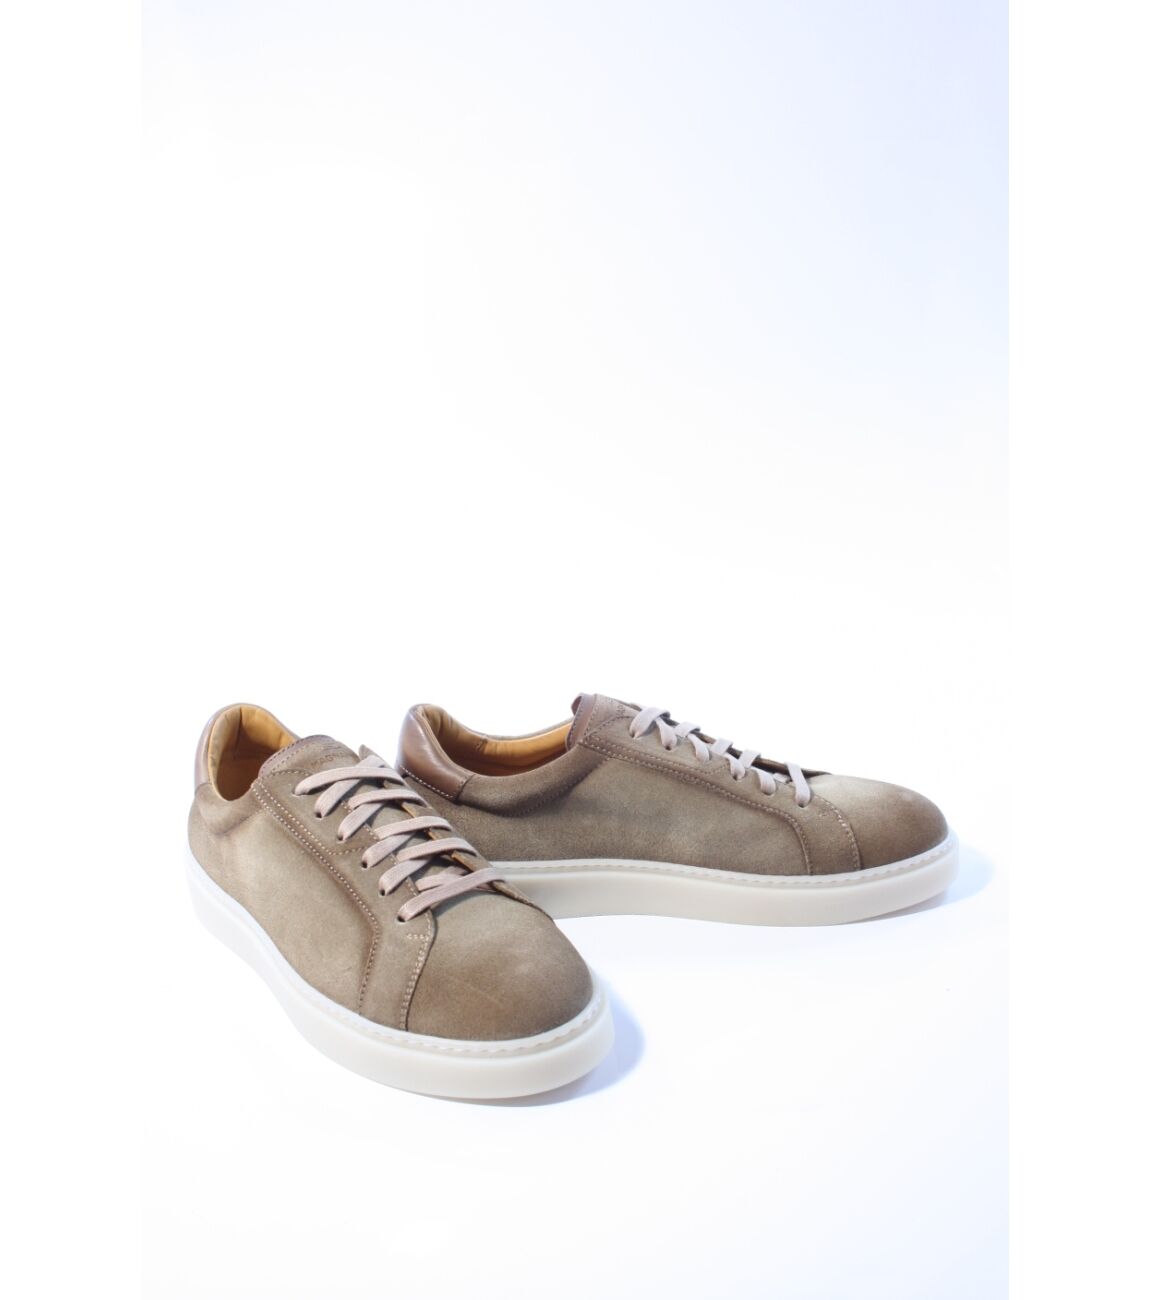 Magnanni Heren sneakers taupe 41